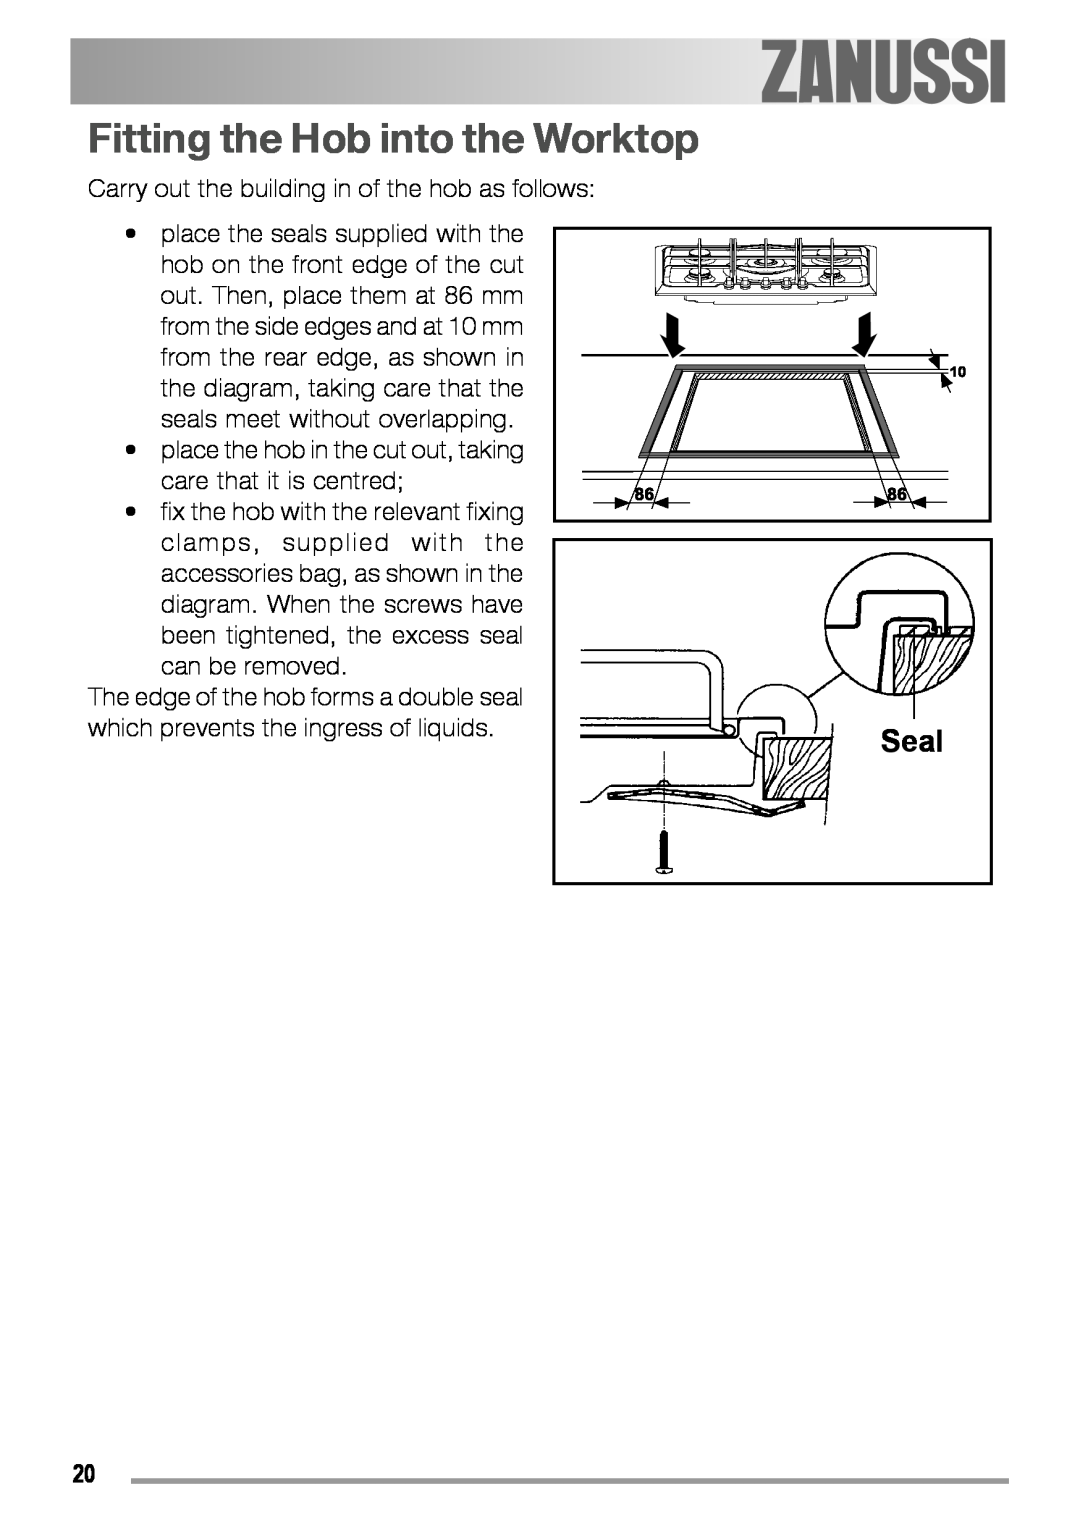 Zanussi ZGF 780 IT manual Fitting the Hob into the Worktop, Seal 